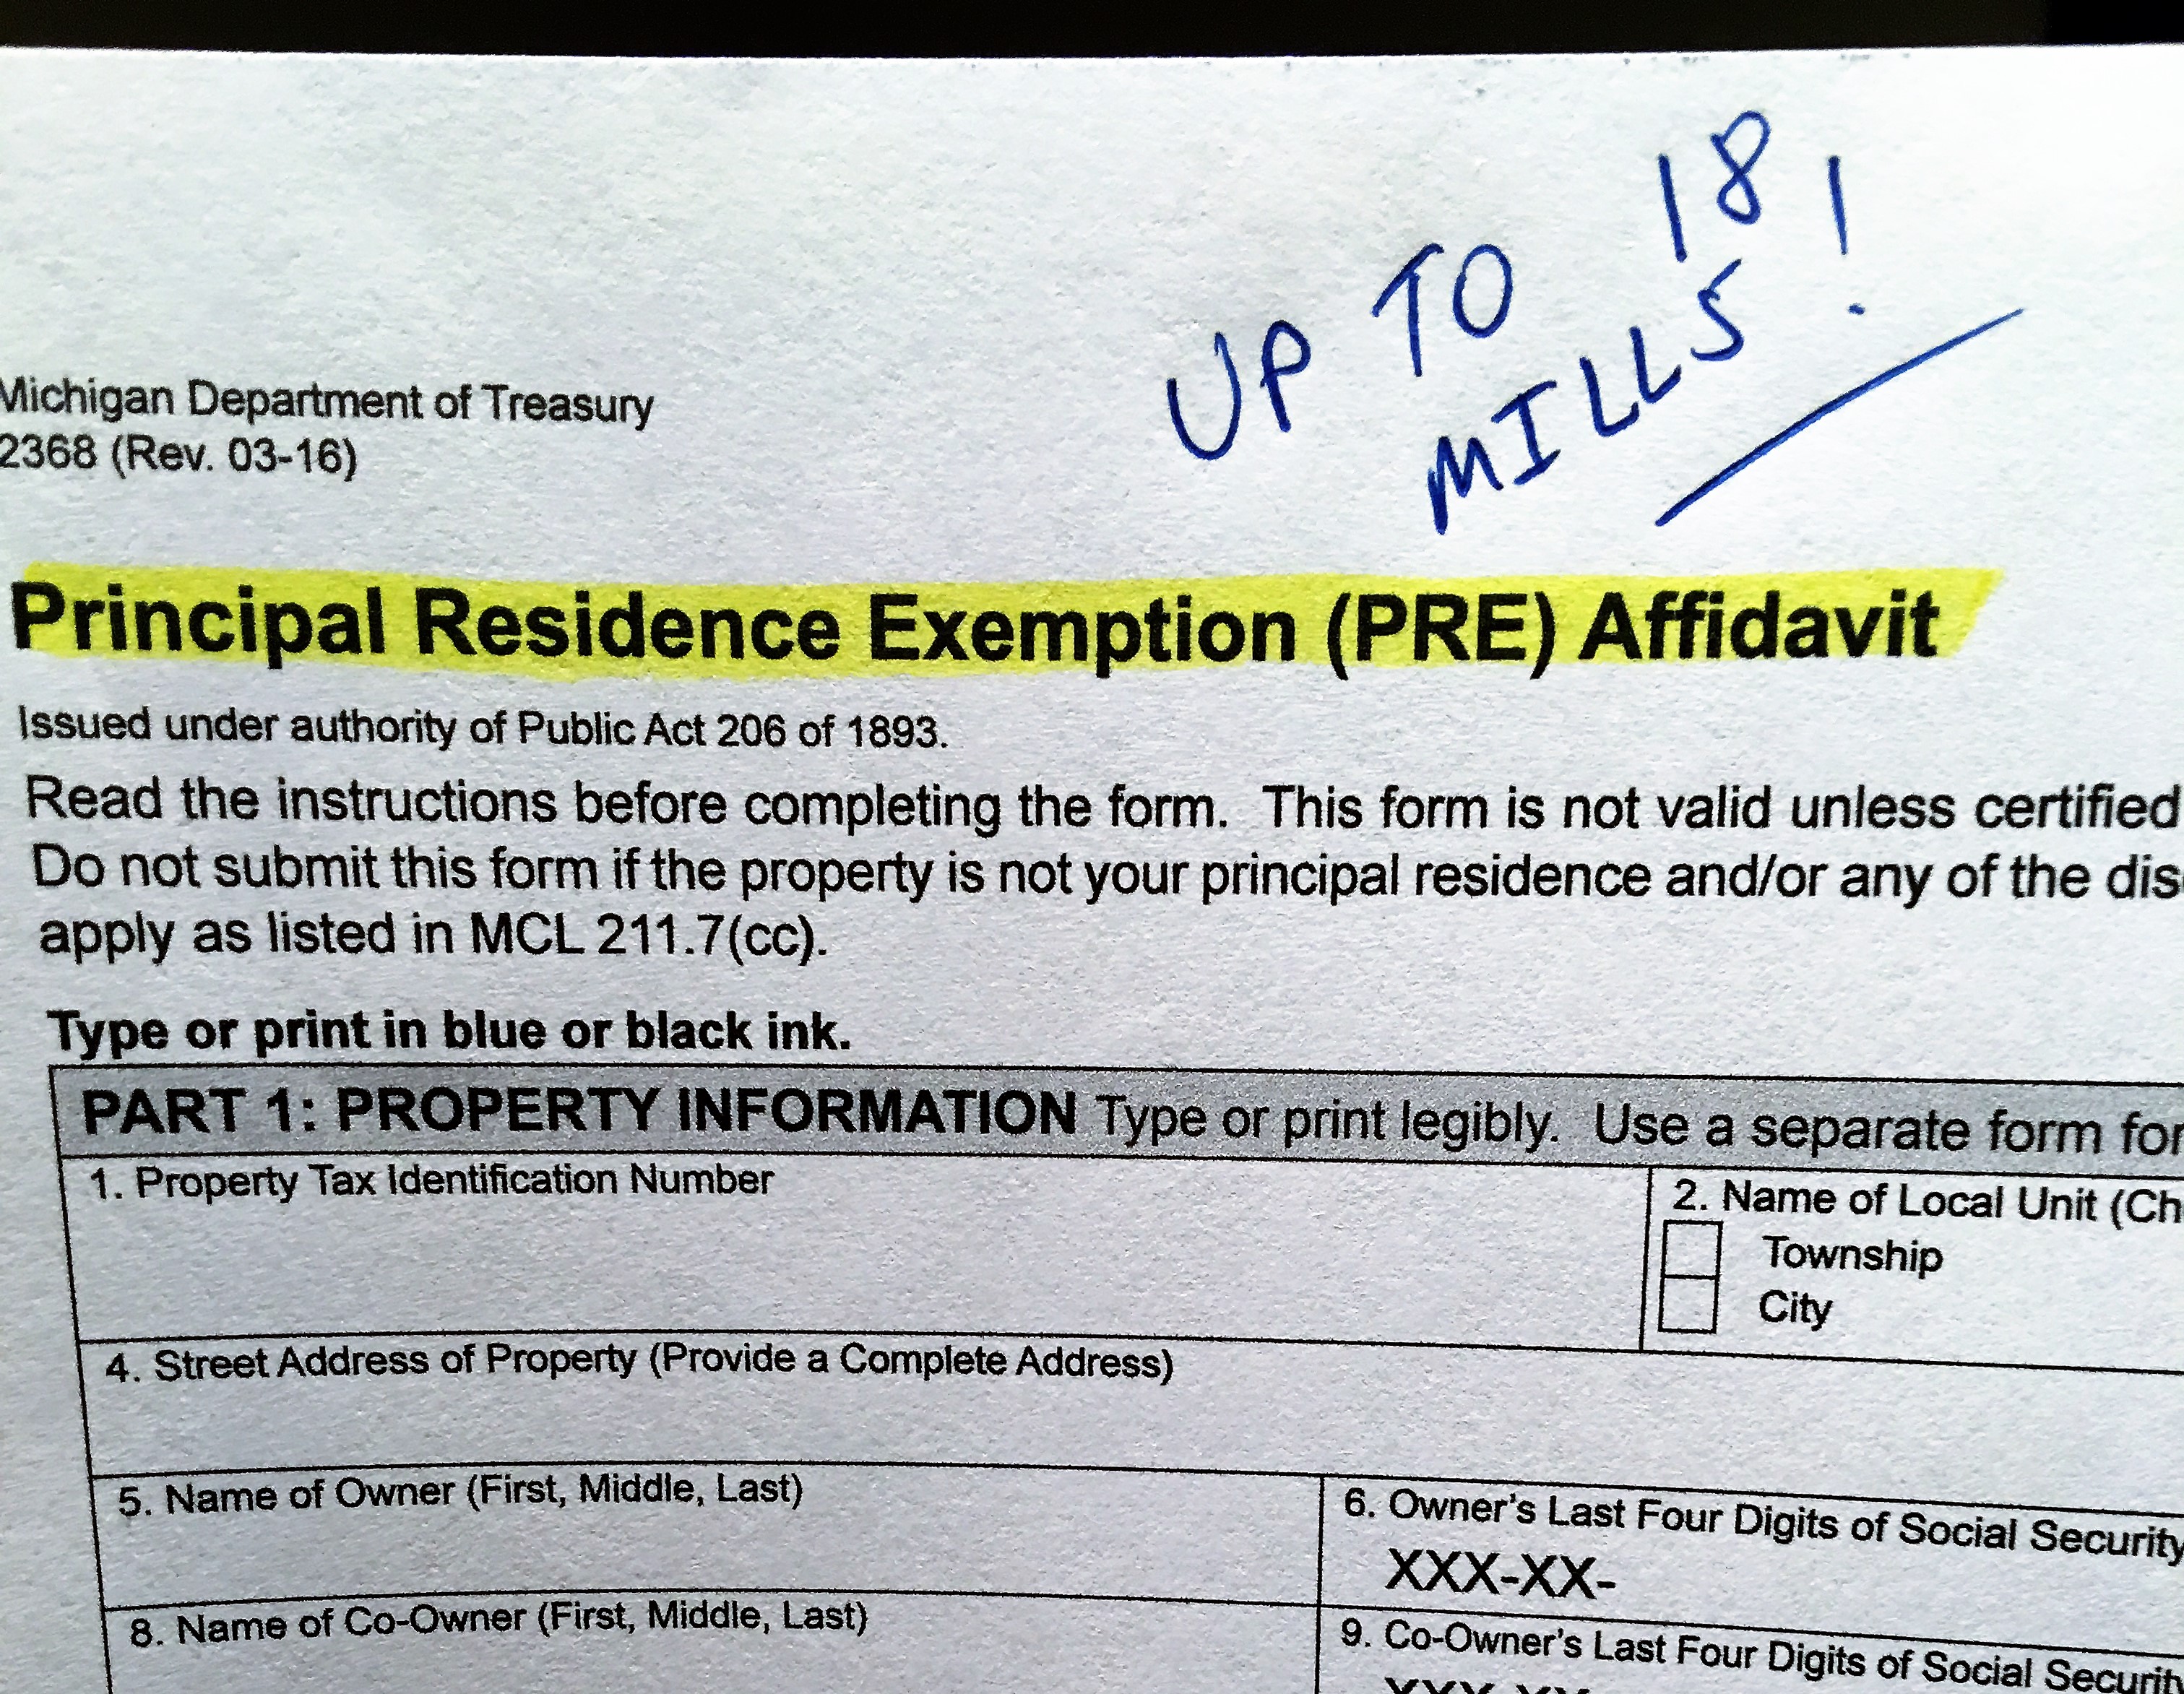 your-homestead-exemption-aka-principal-residence-know-the-limits